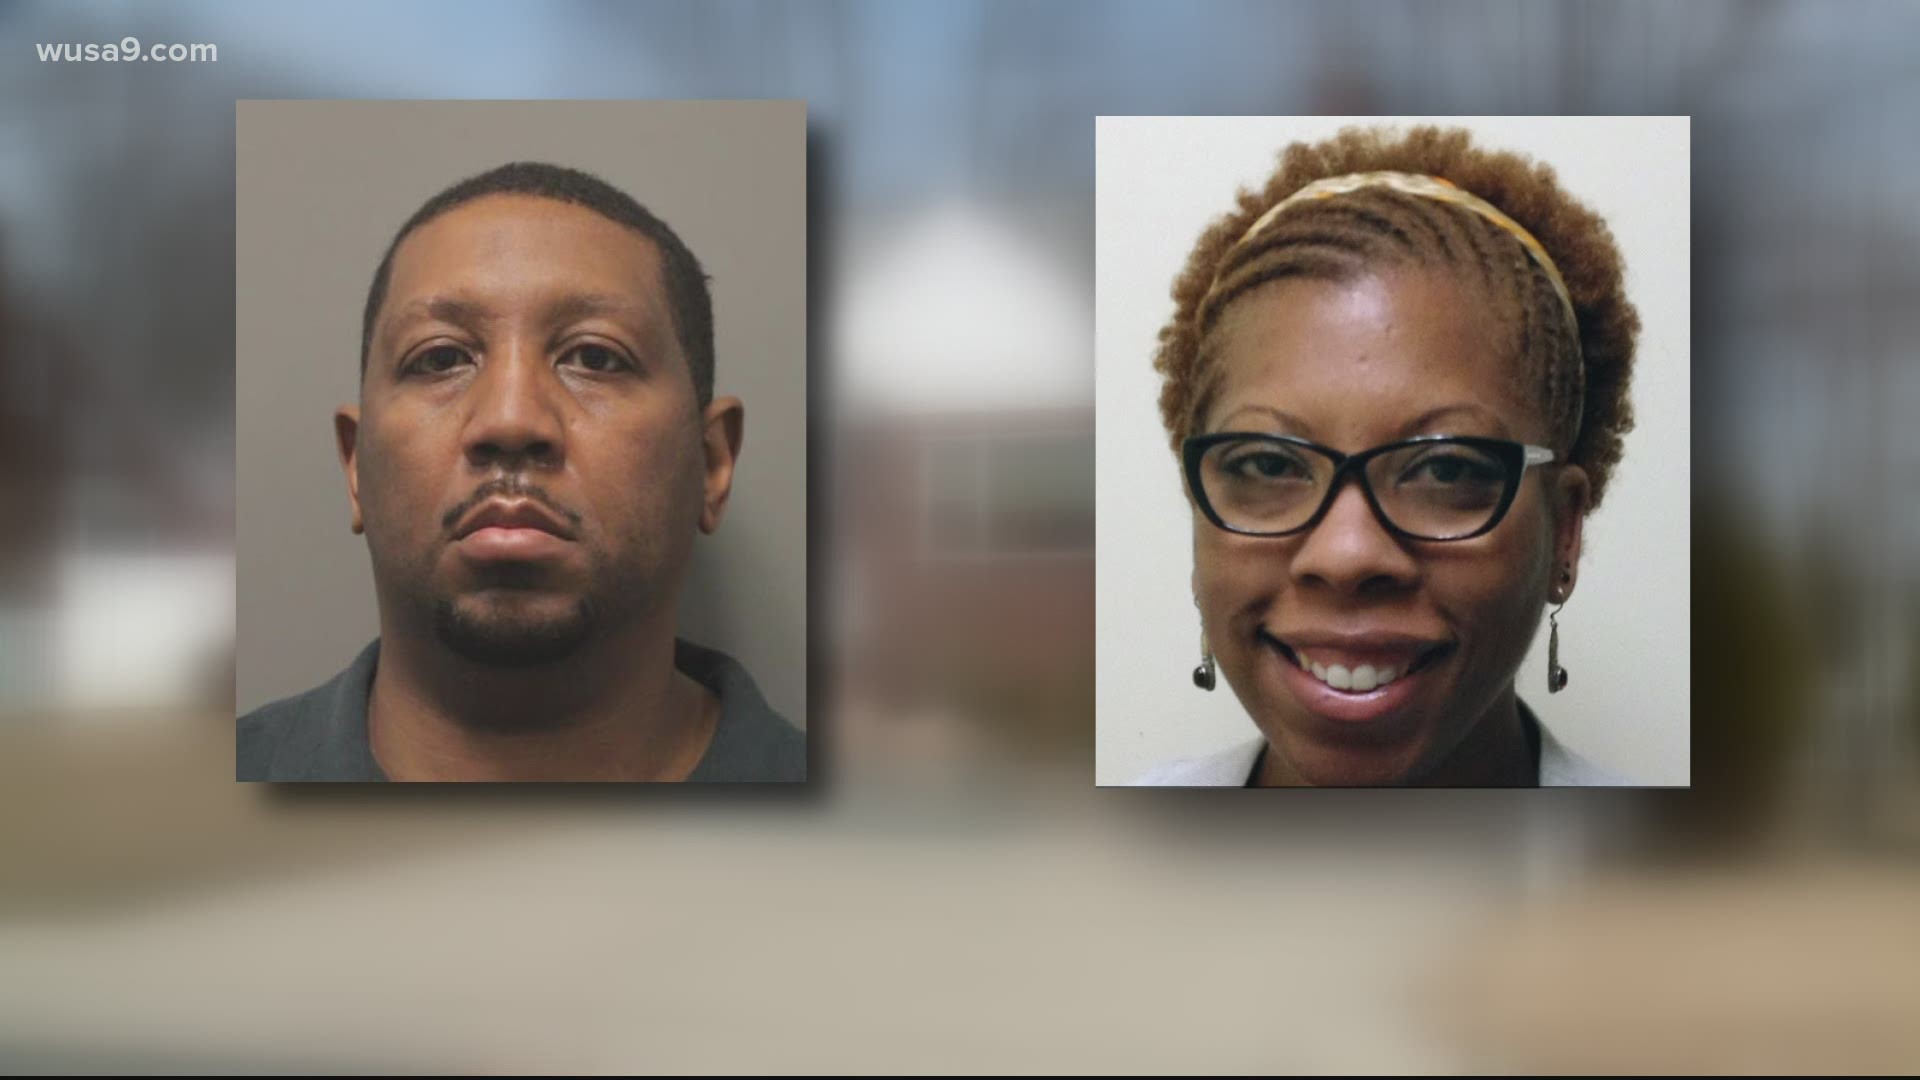 Reginald Dunlap Jr., 43, of North Kensington, has been charged with first-degree murder after his wife, Lauren Charles, was found dead Sunday inside their home.